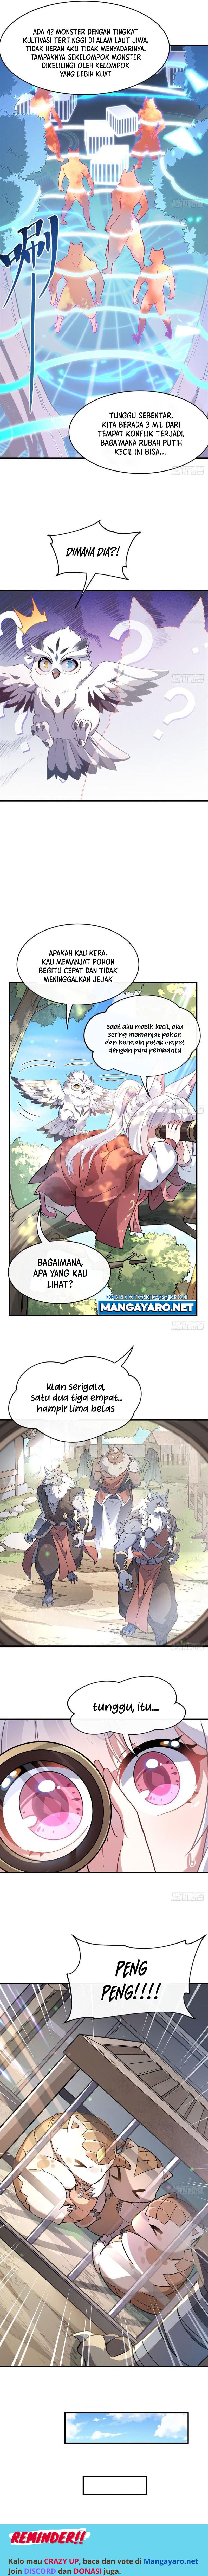 Dilarang COPAS - situs resmi www.mangacanblog.com - Komik my female apprentices are all big shots from the future 189 - chapter 189 190 Indonesia my female apprentices are all big shots from the future 189 - chapter 189 Terbaru 7|Baca Manga Komik Indonesia|Mangacan